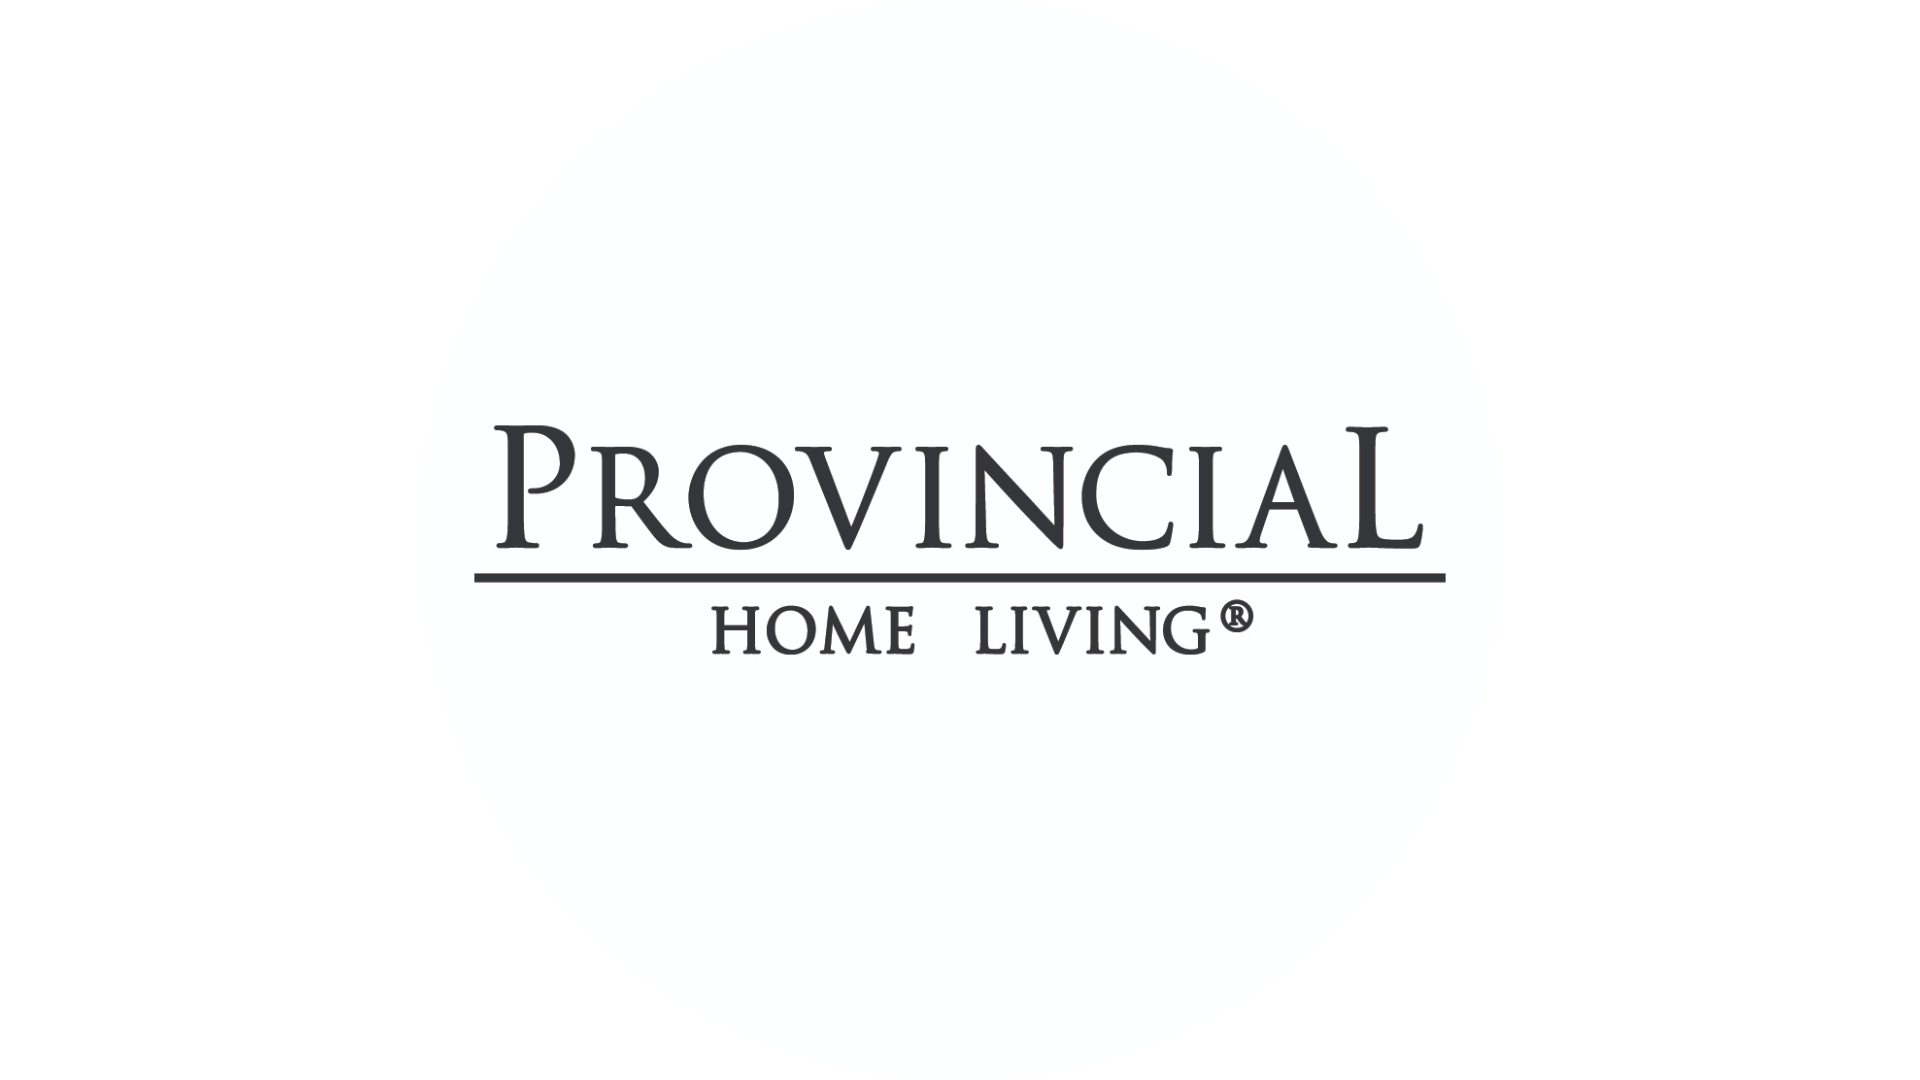 Get the Farmhouse style with Provincial Home Living